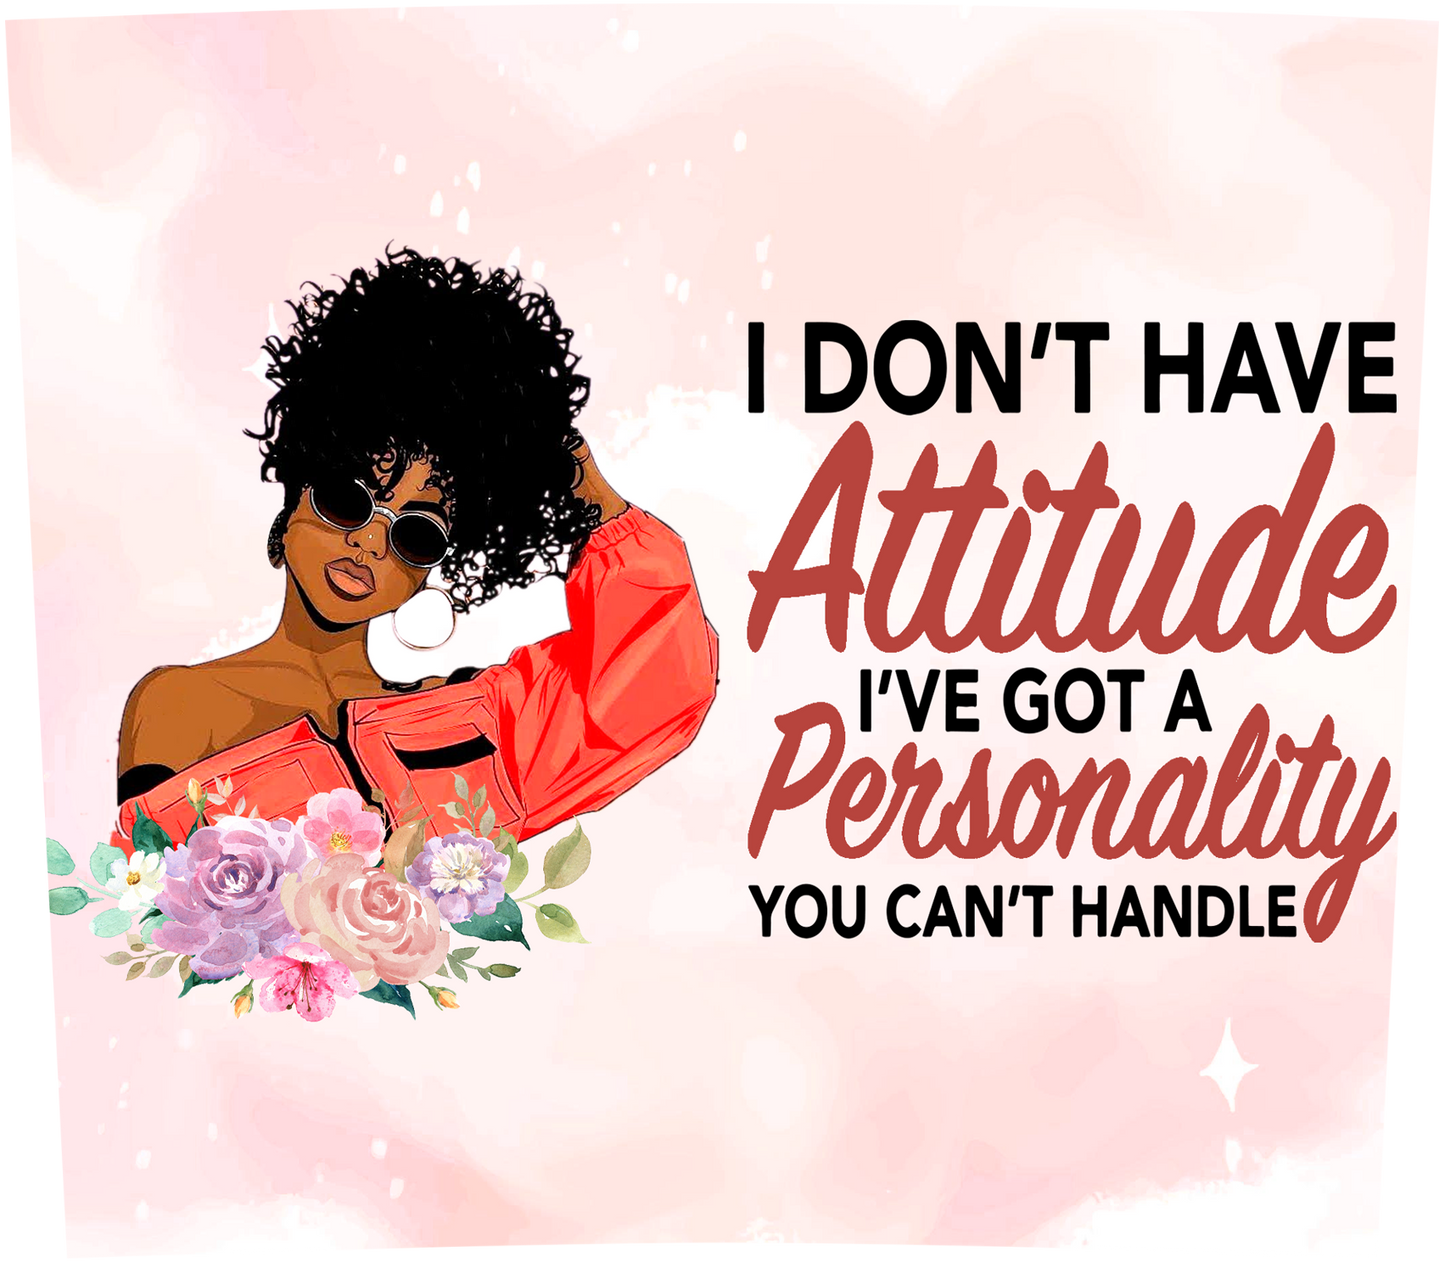 "I don't have an attitude" Stainless steel tumbler